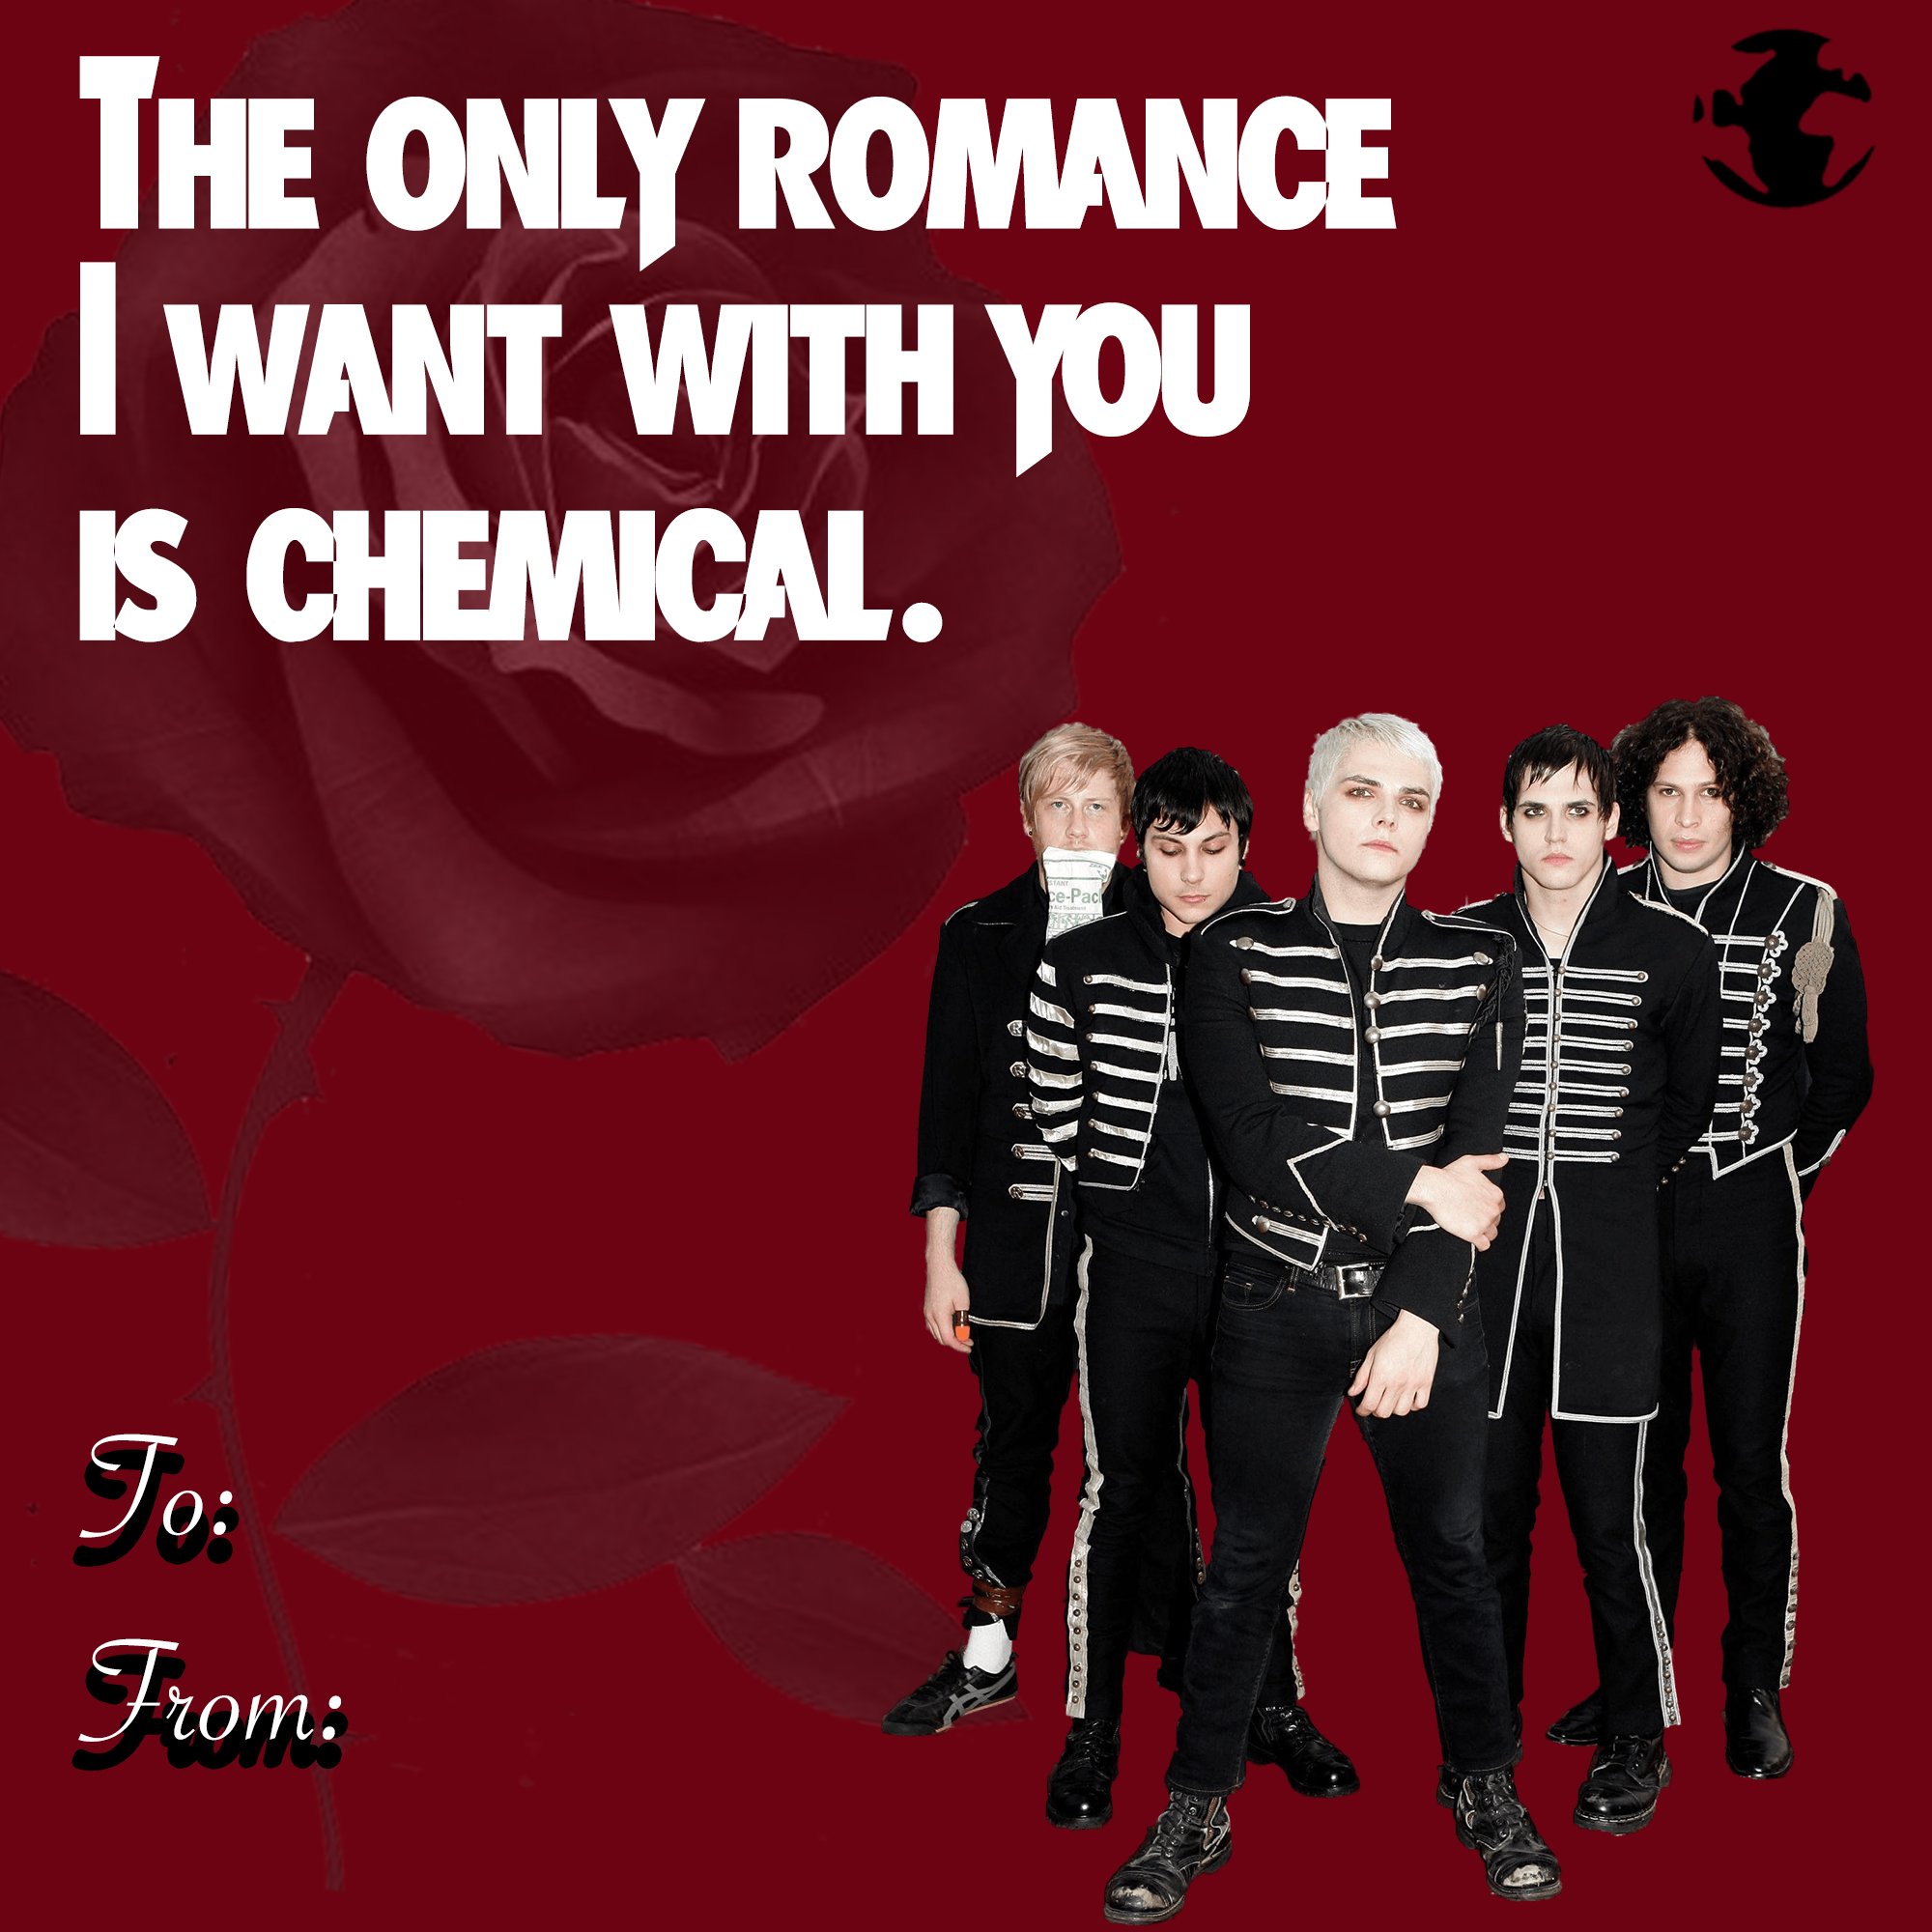 eBaum's Valentine's Day Cards 2022 - my chemical romance - The Only Romance I Want With You Is Chemical. Jo From Go